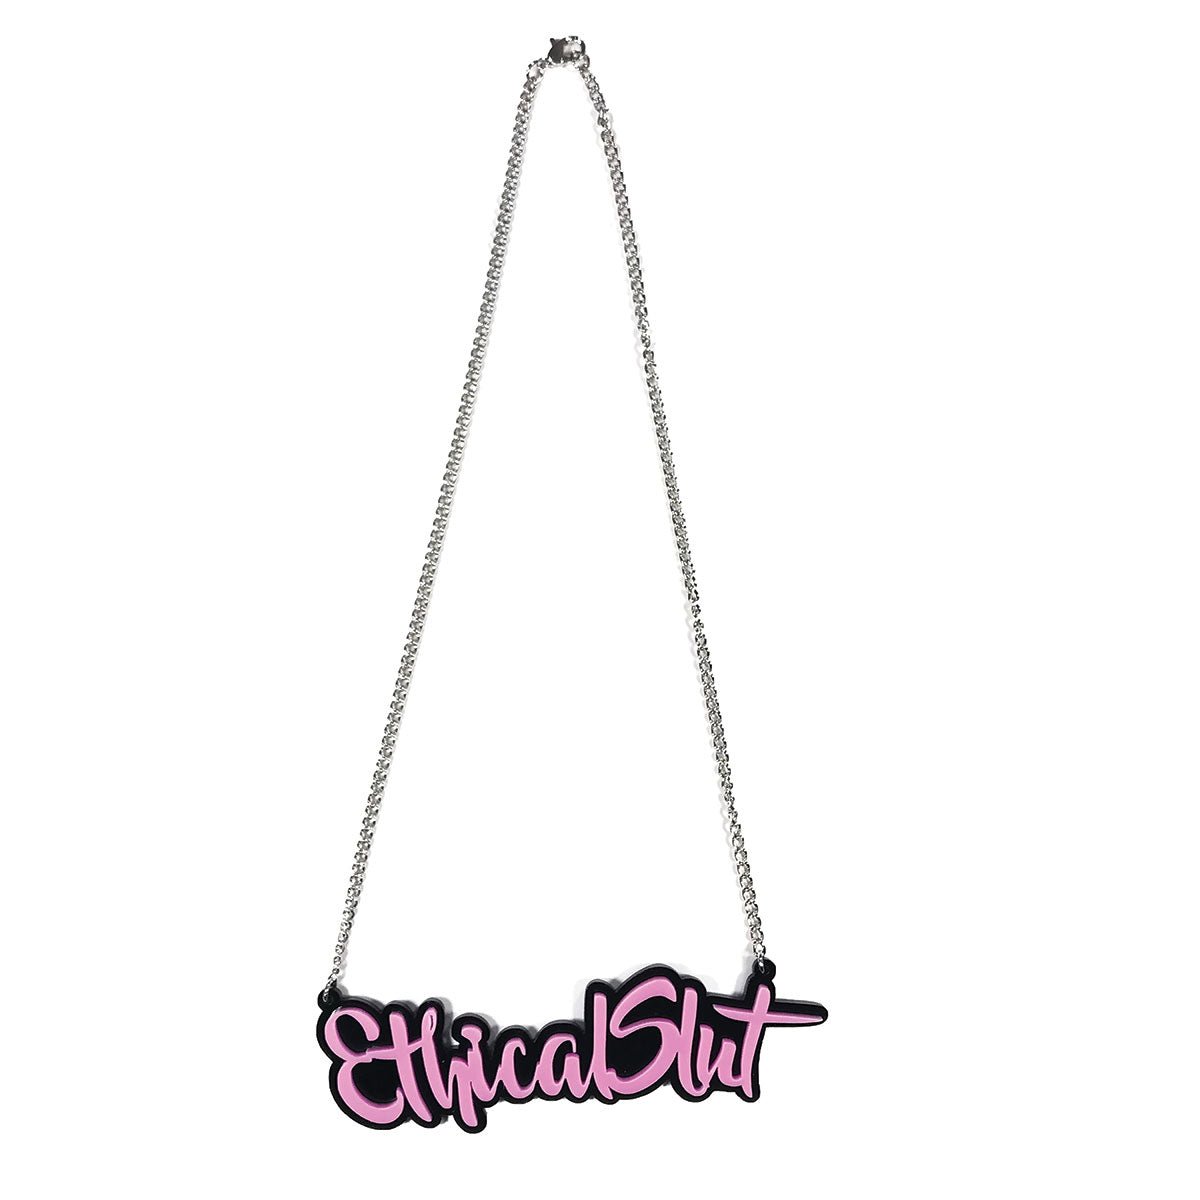 Geeky & Kinky Ethical Slut Necklace Necklaces